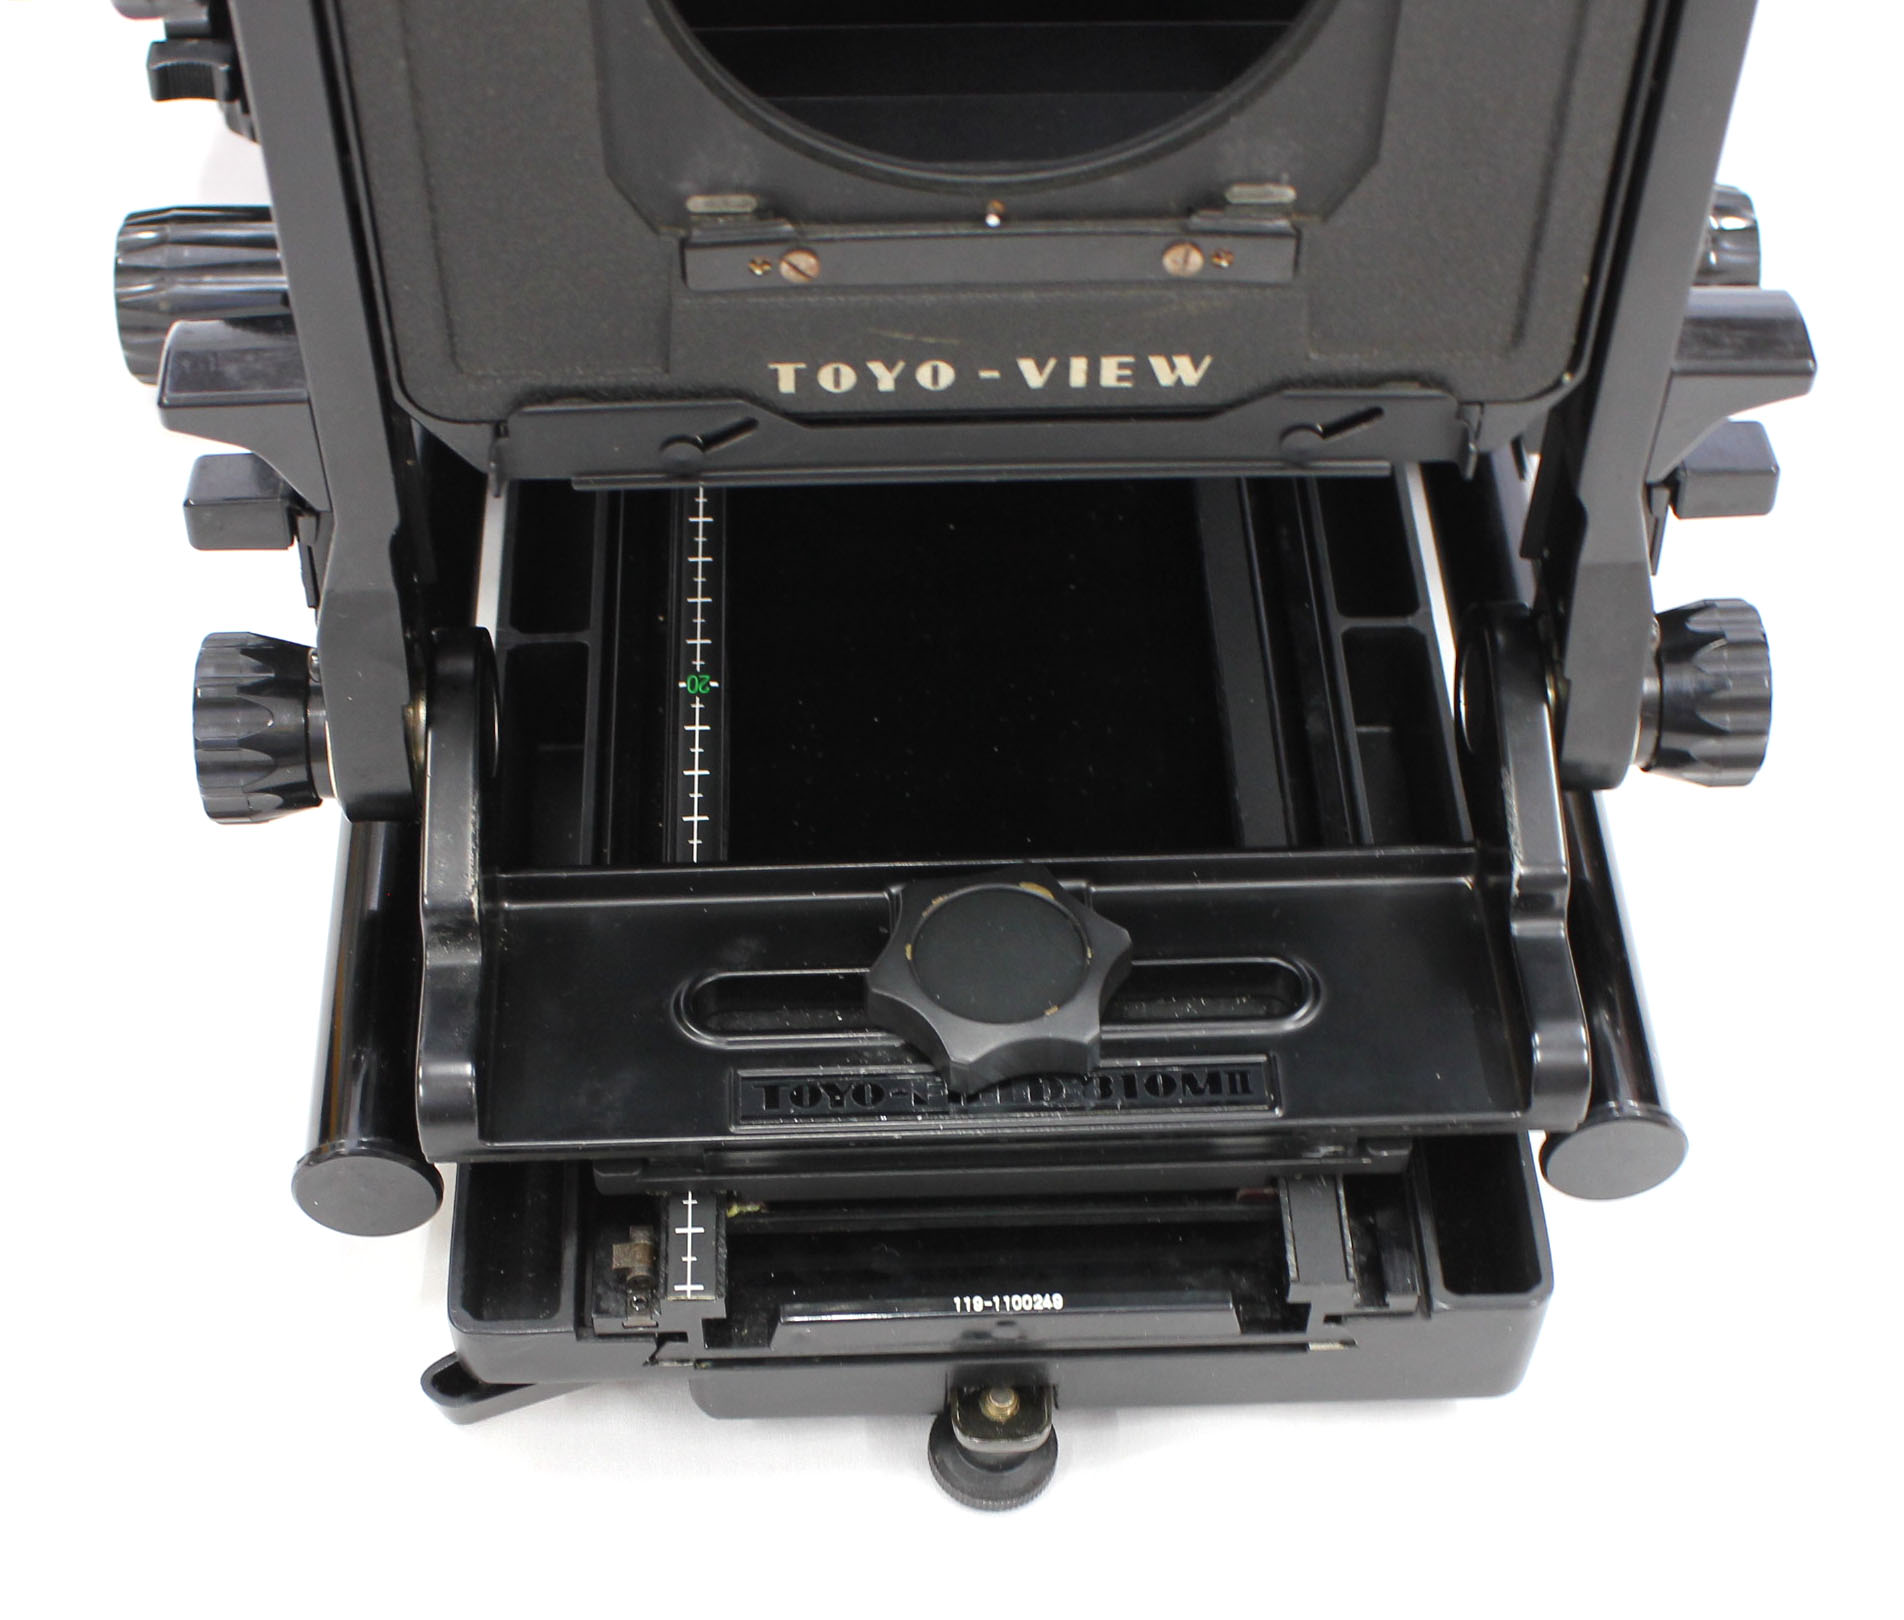 Toyo Field 810M II 8x10 Large Format Camera with Linhof Board Adapter in Toyo Case from Japan Photo 1